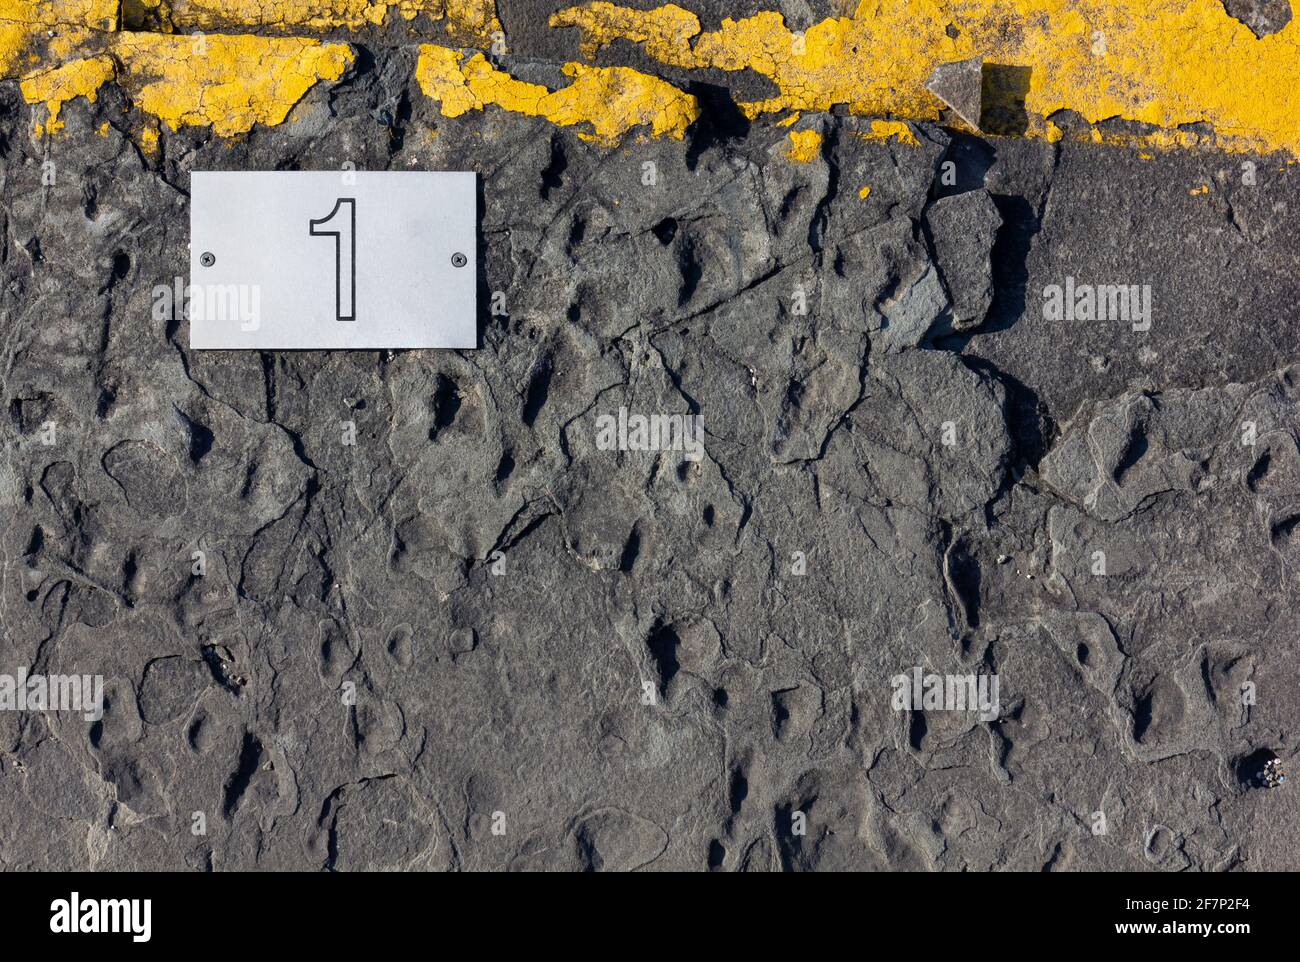 Asphalt background with a yellow strip on top and a white screwed-in tile with number one printed on it Stock Photo